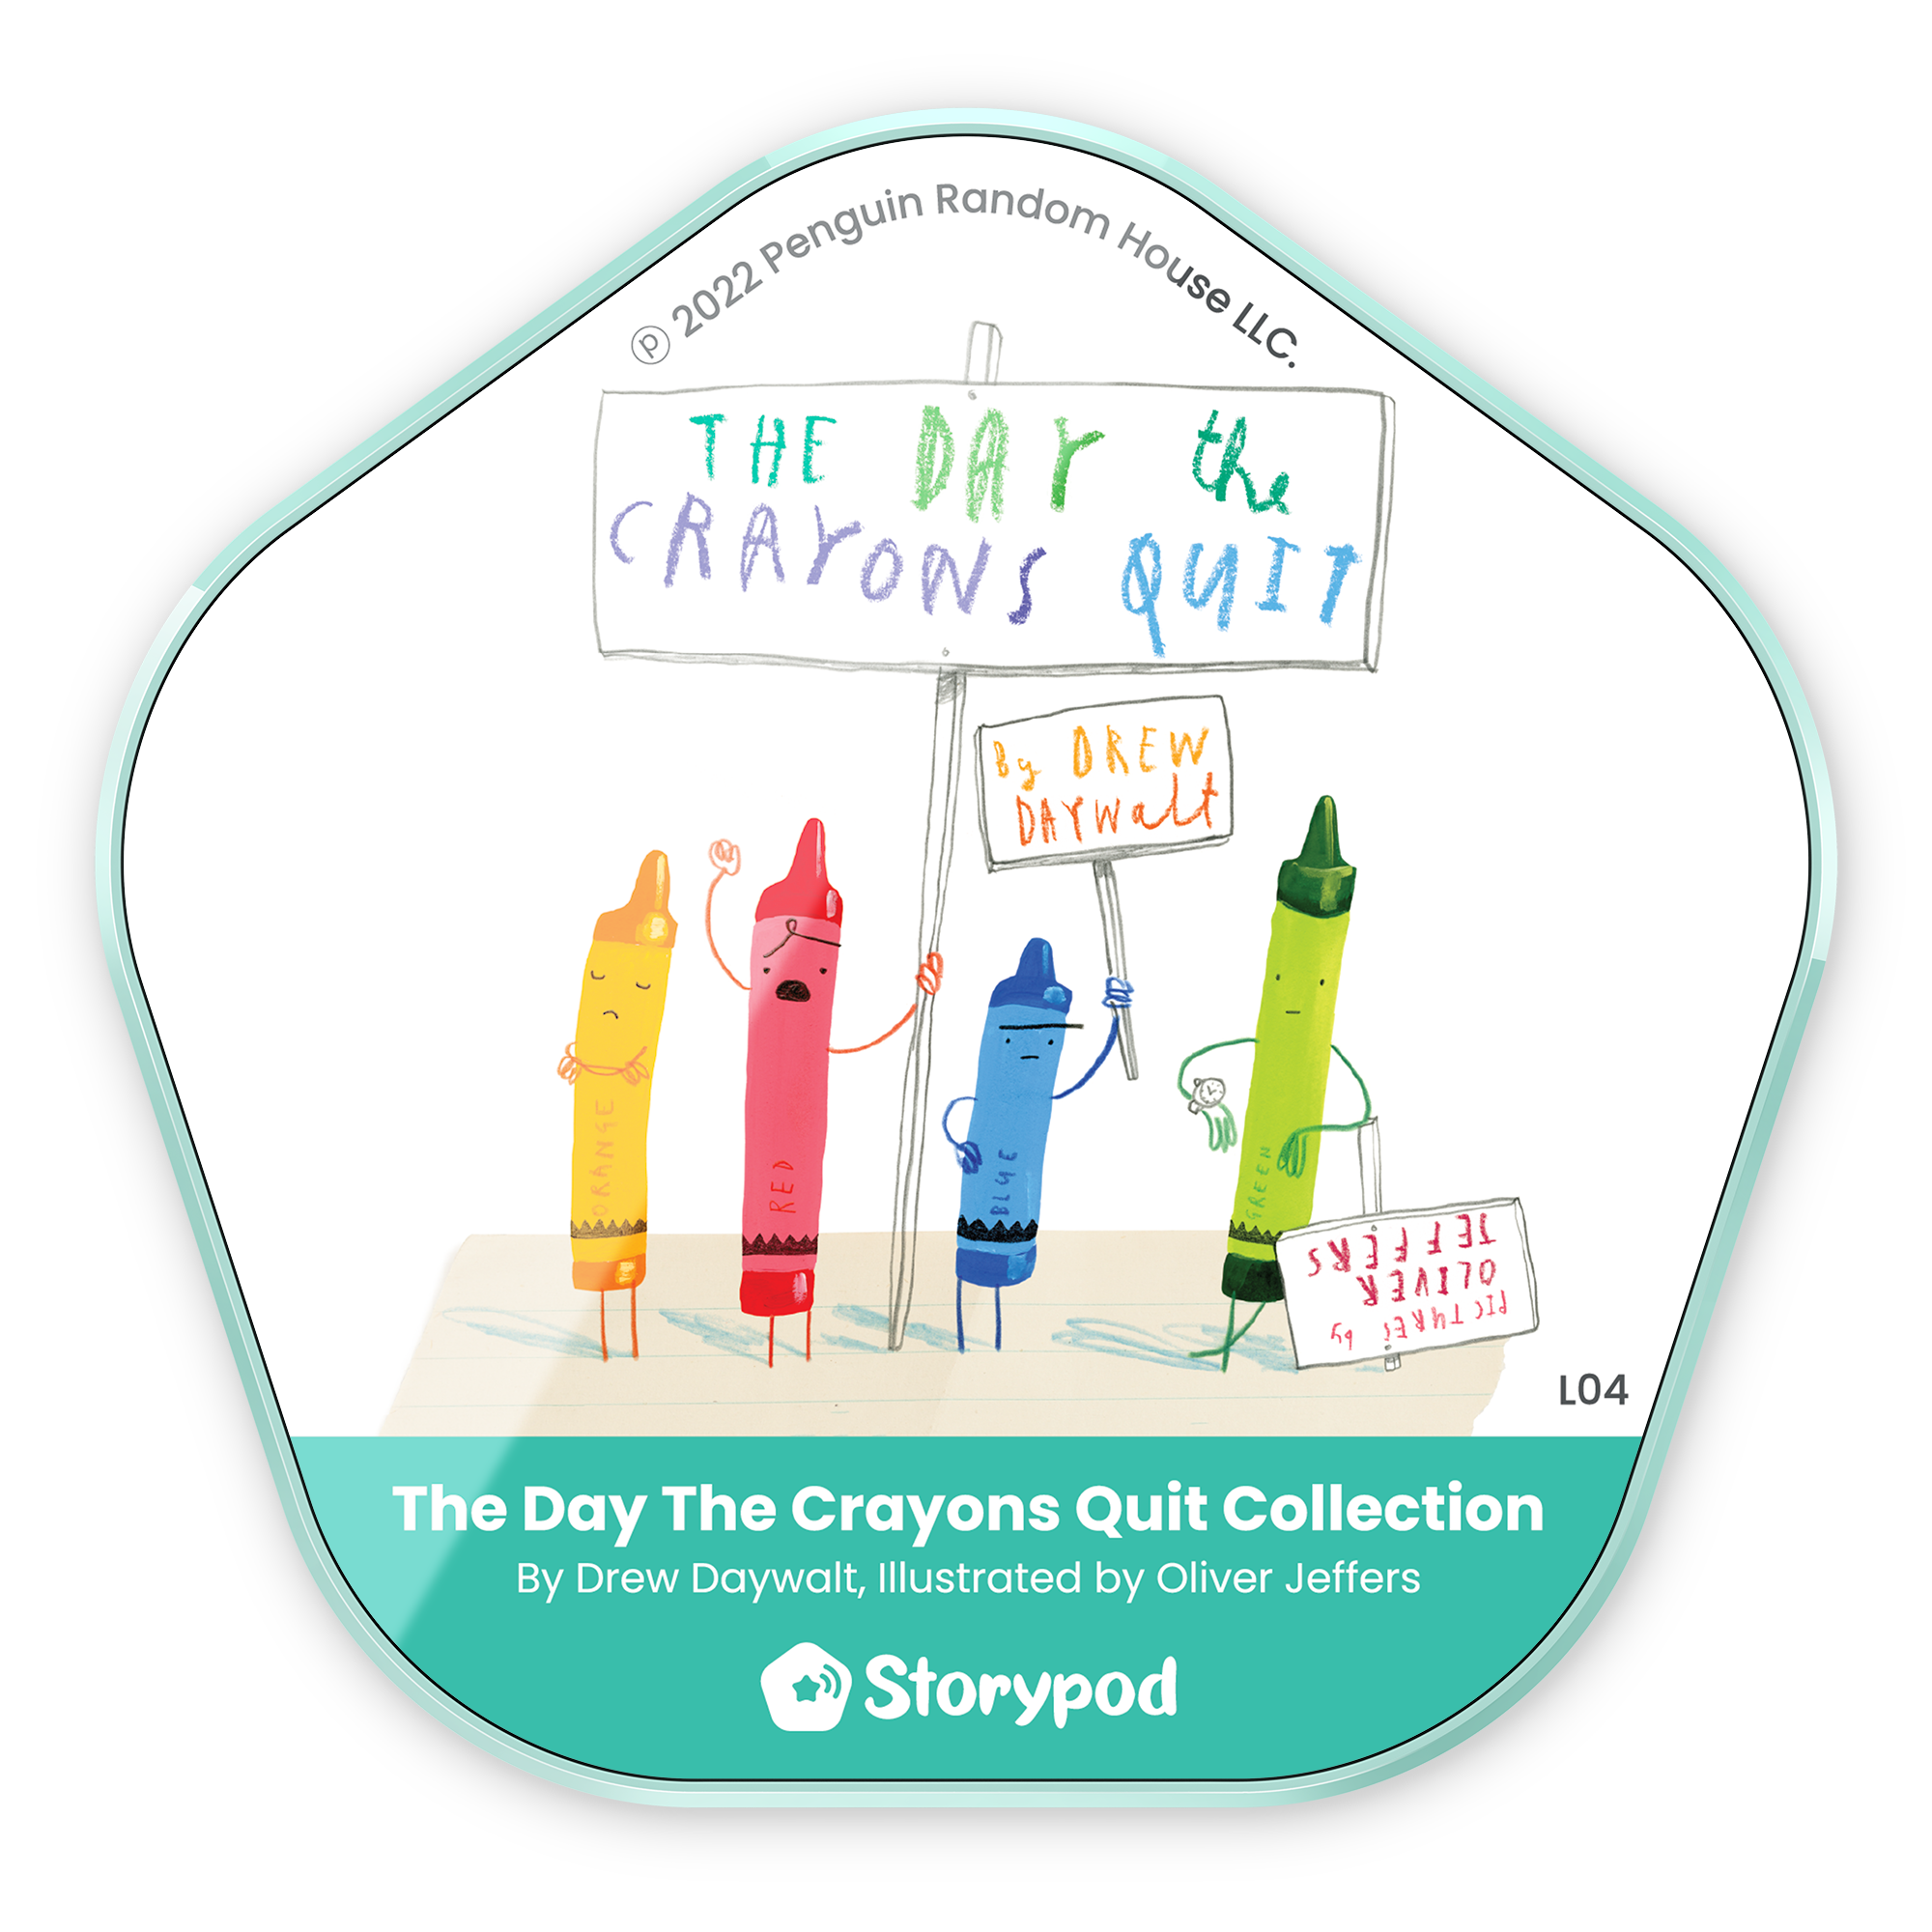 The Day the Crayons Quit - Kidstop toys and books